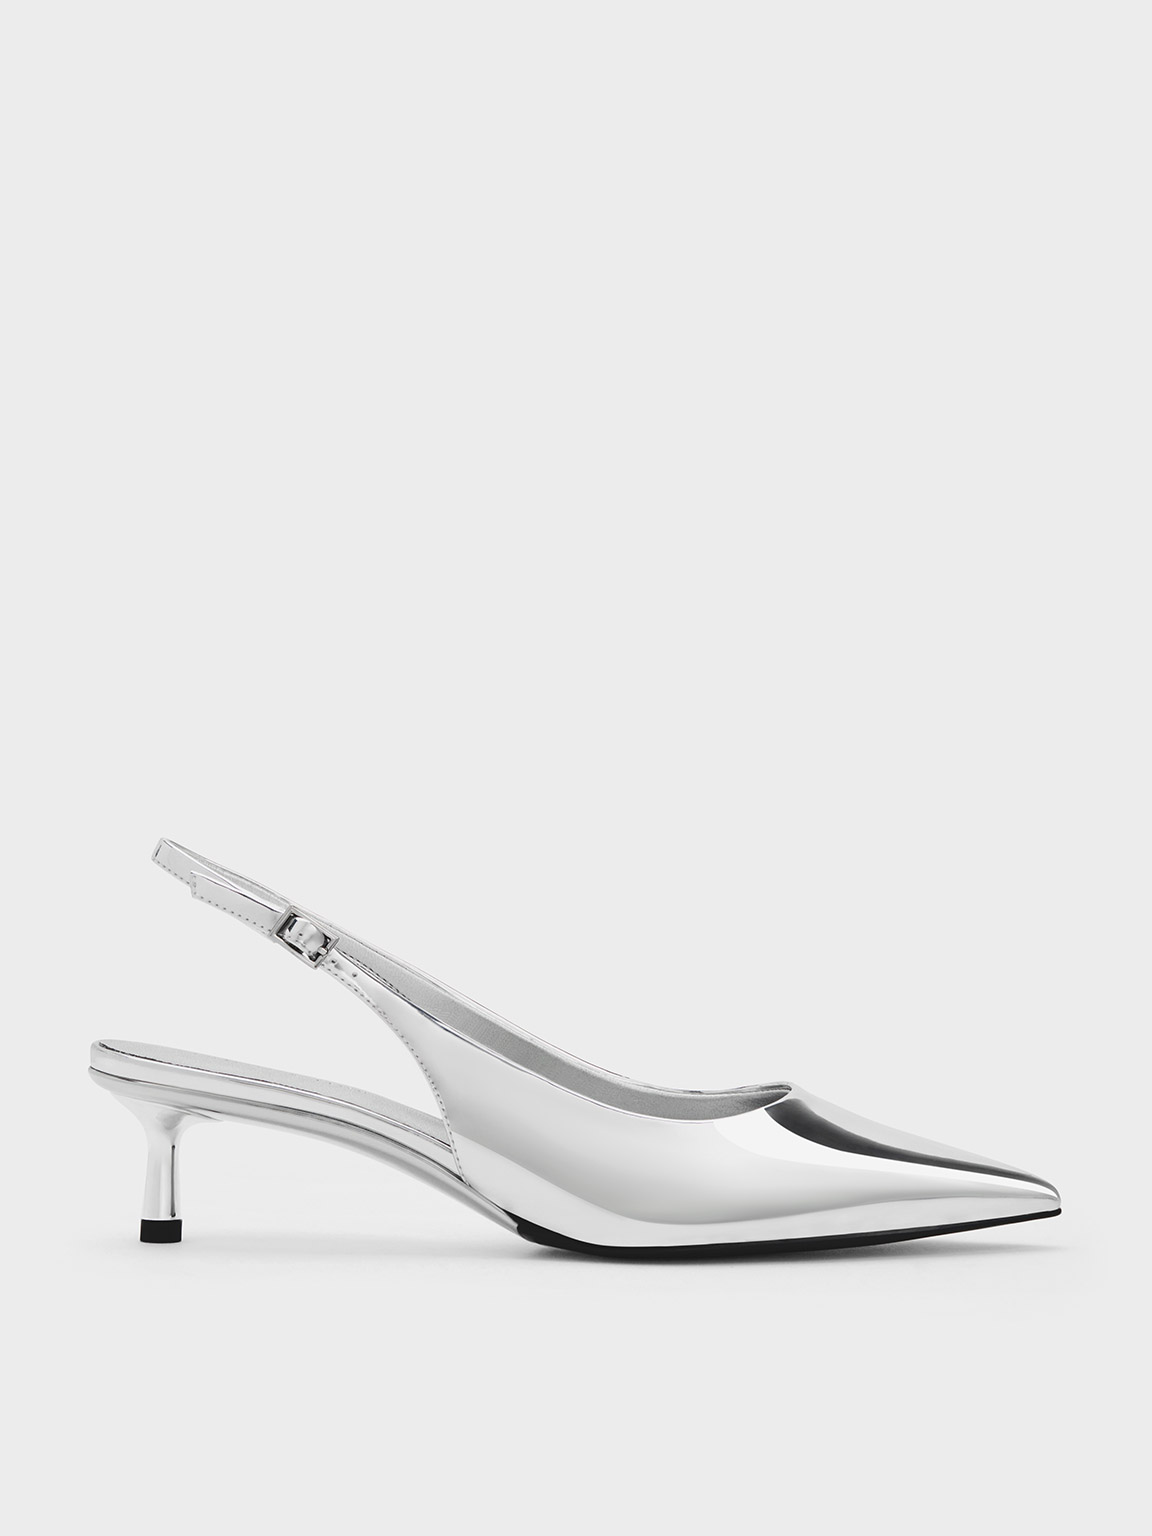 Silver Metallic Pointed-Toe Slingback Pumps - CHARLES & KEITH US